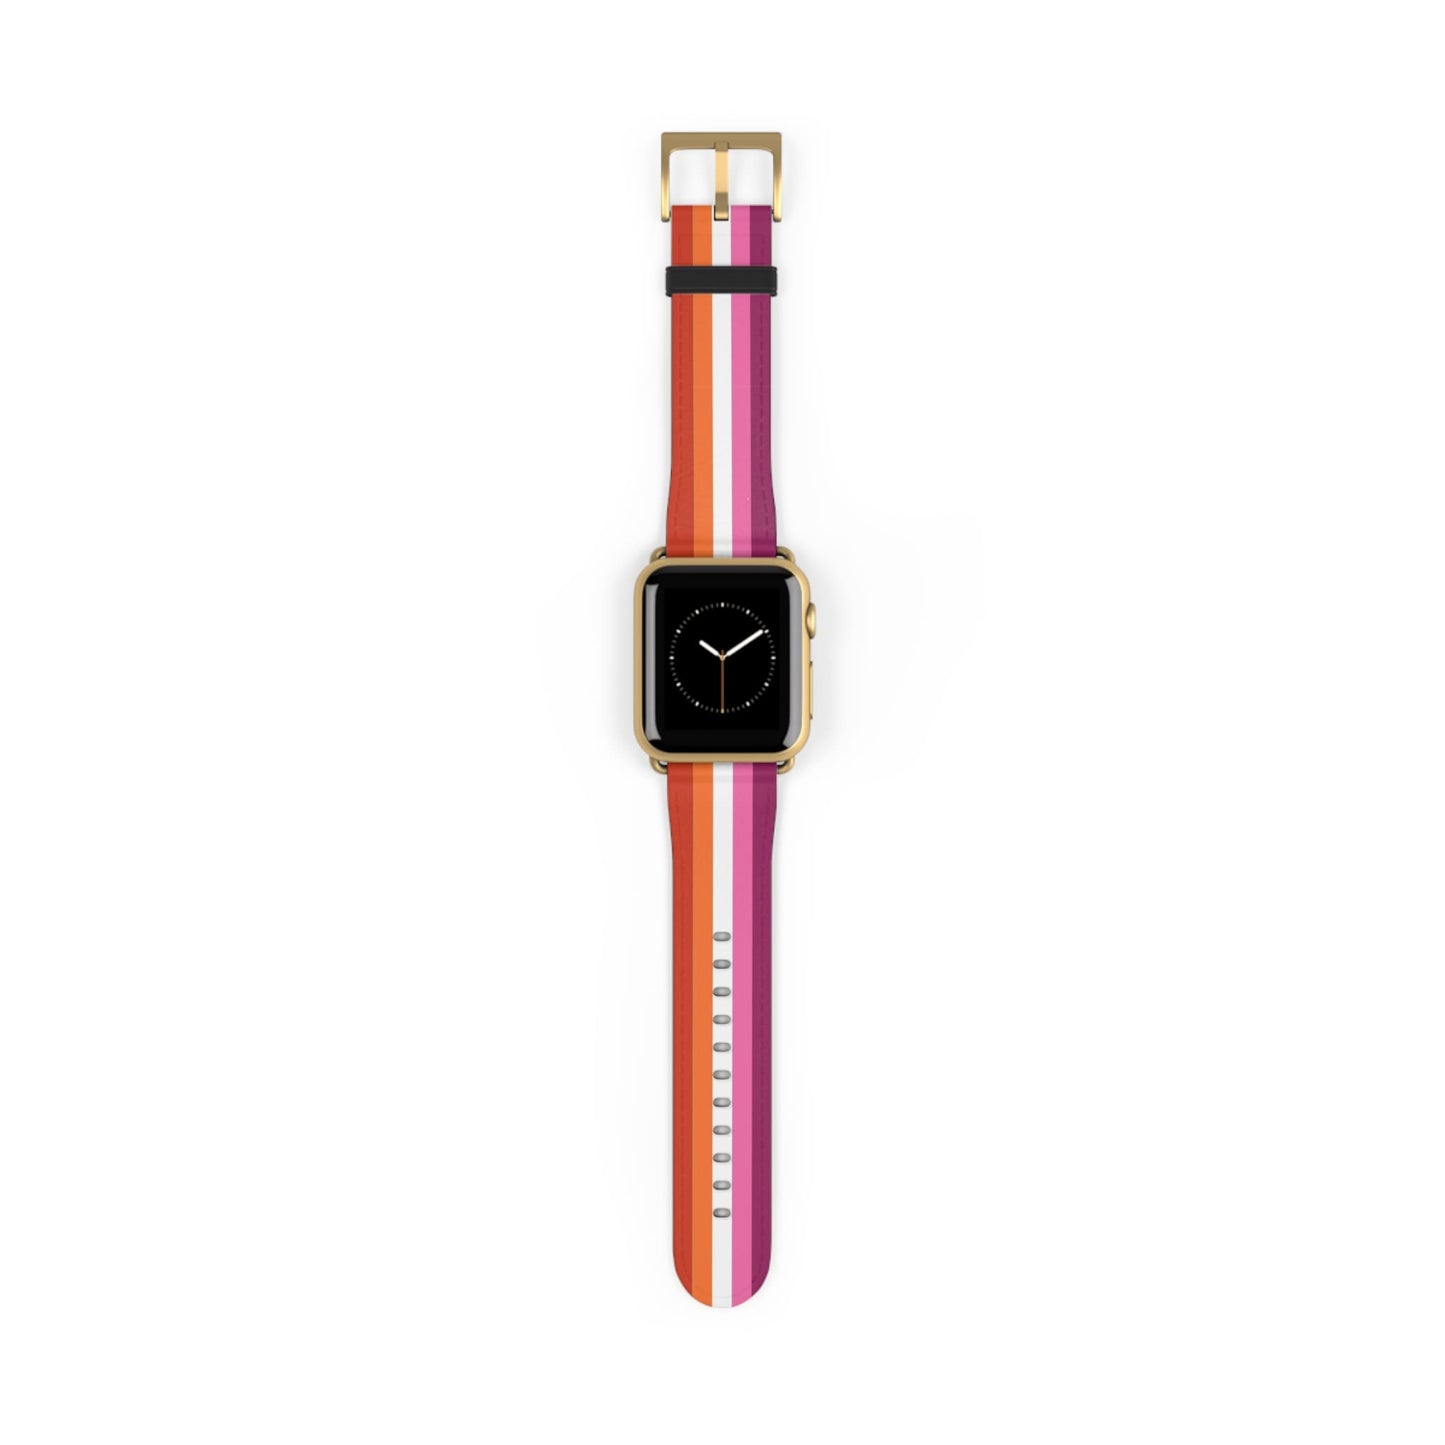 Lesbian watch band for Apple iwatch, gold